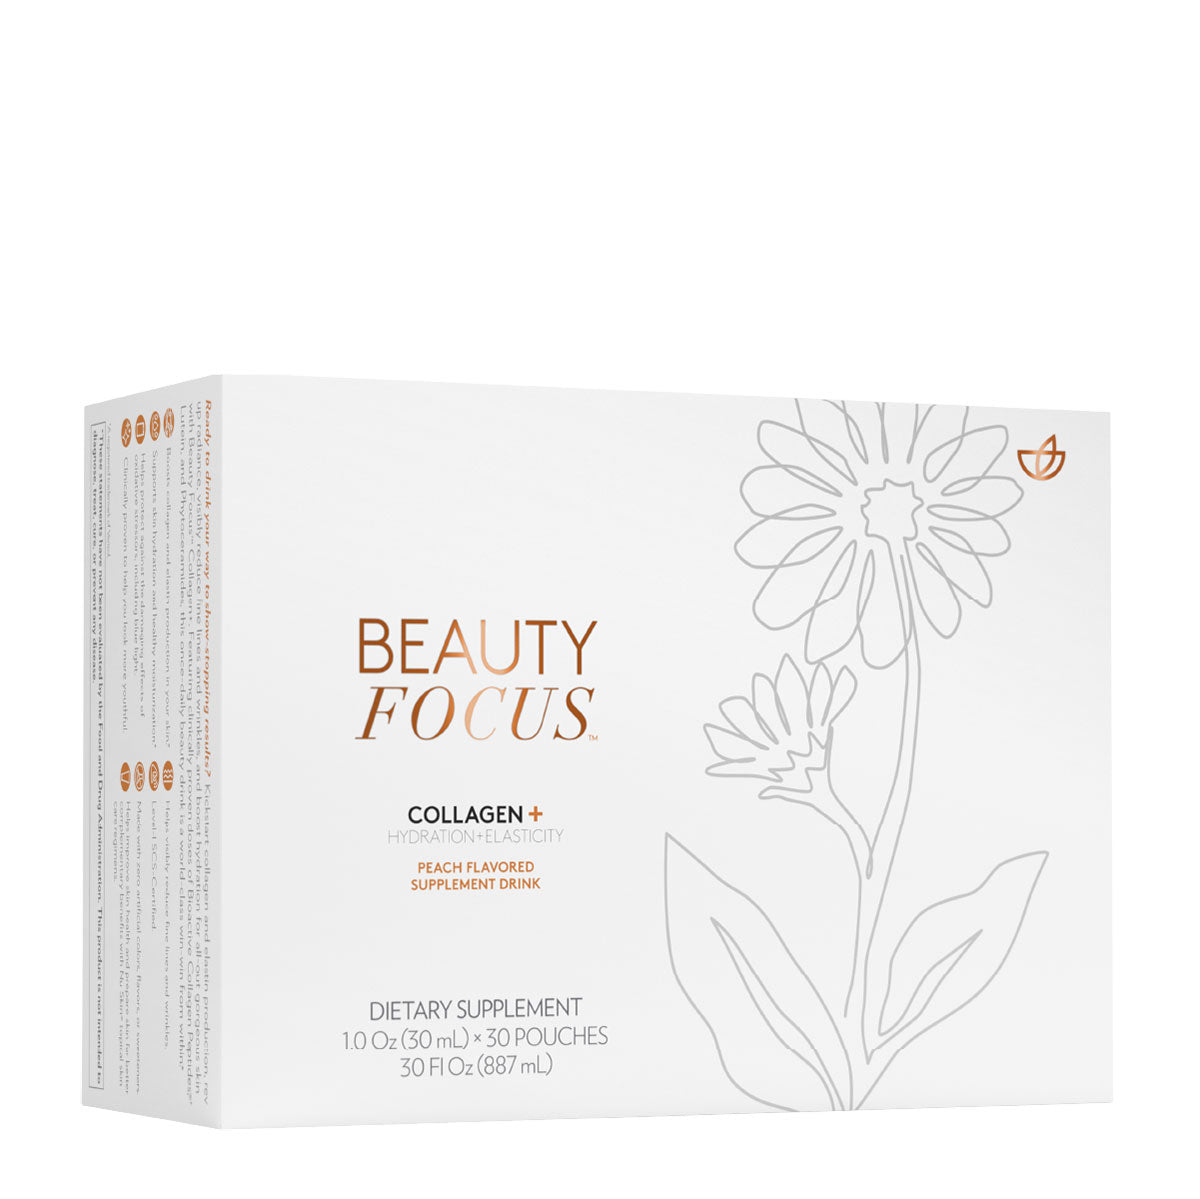 Beauty Focus™ Collagen (peach) + & Nu Biome SubscriptionBuy
* Discount will apply at checkout. 
Get the best of both worlds with our Beauty Focus Collagen+ and Nu Biome subscription. Kickstart collagen and elastin productBeauty Focus™ Collagen (peach) + & Nu Biome Subscription